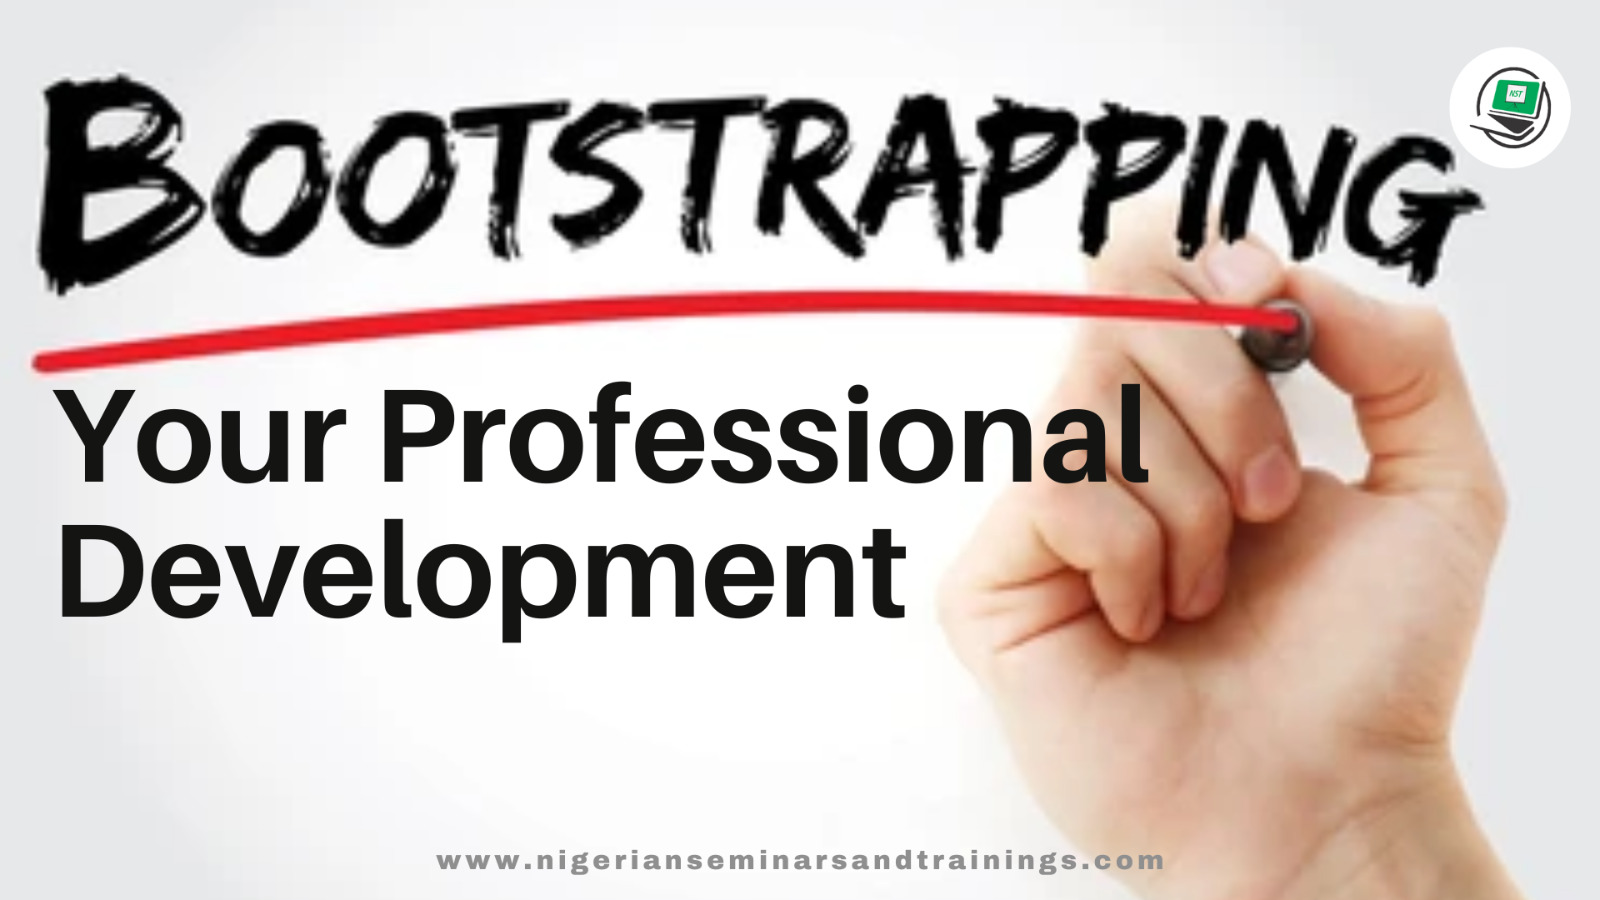 Bootstrapping Your Professional Development